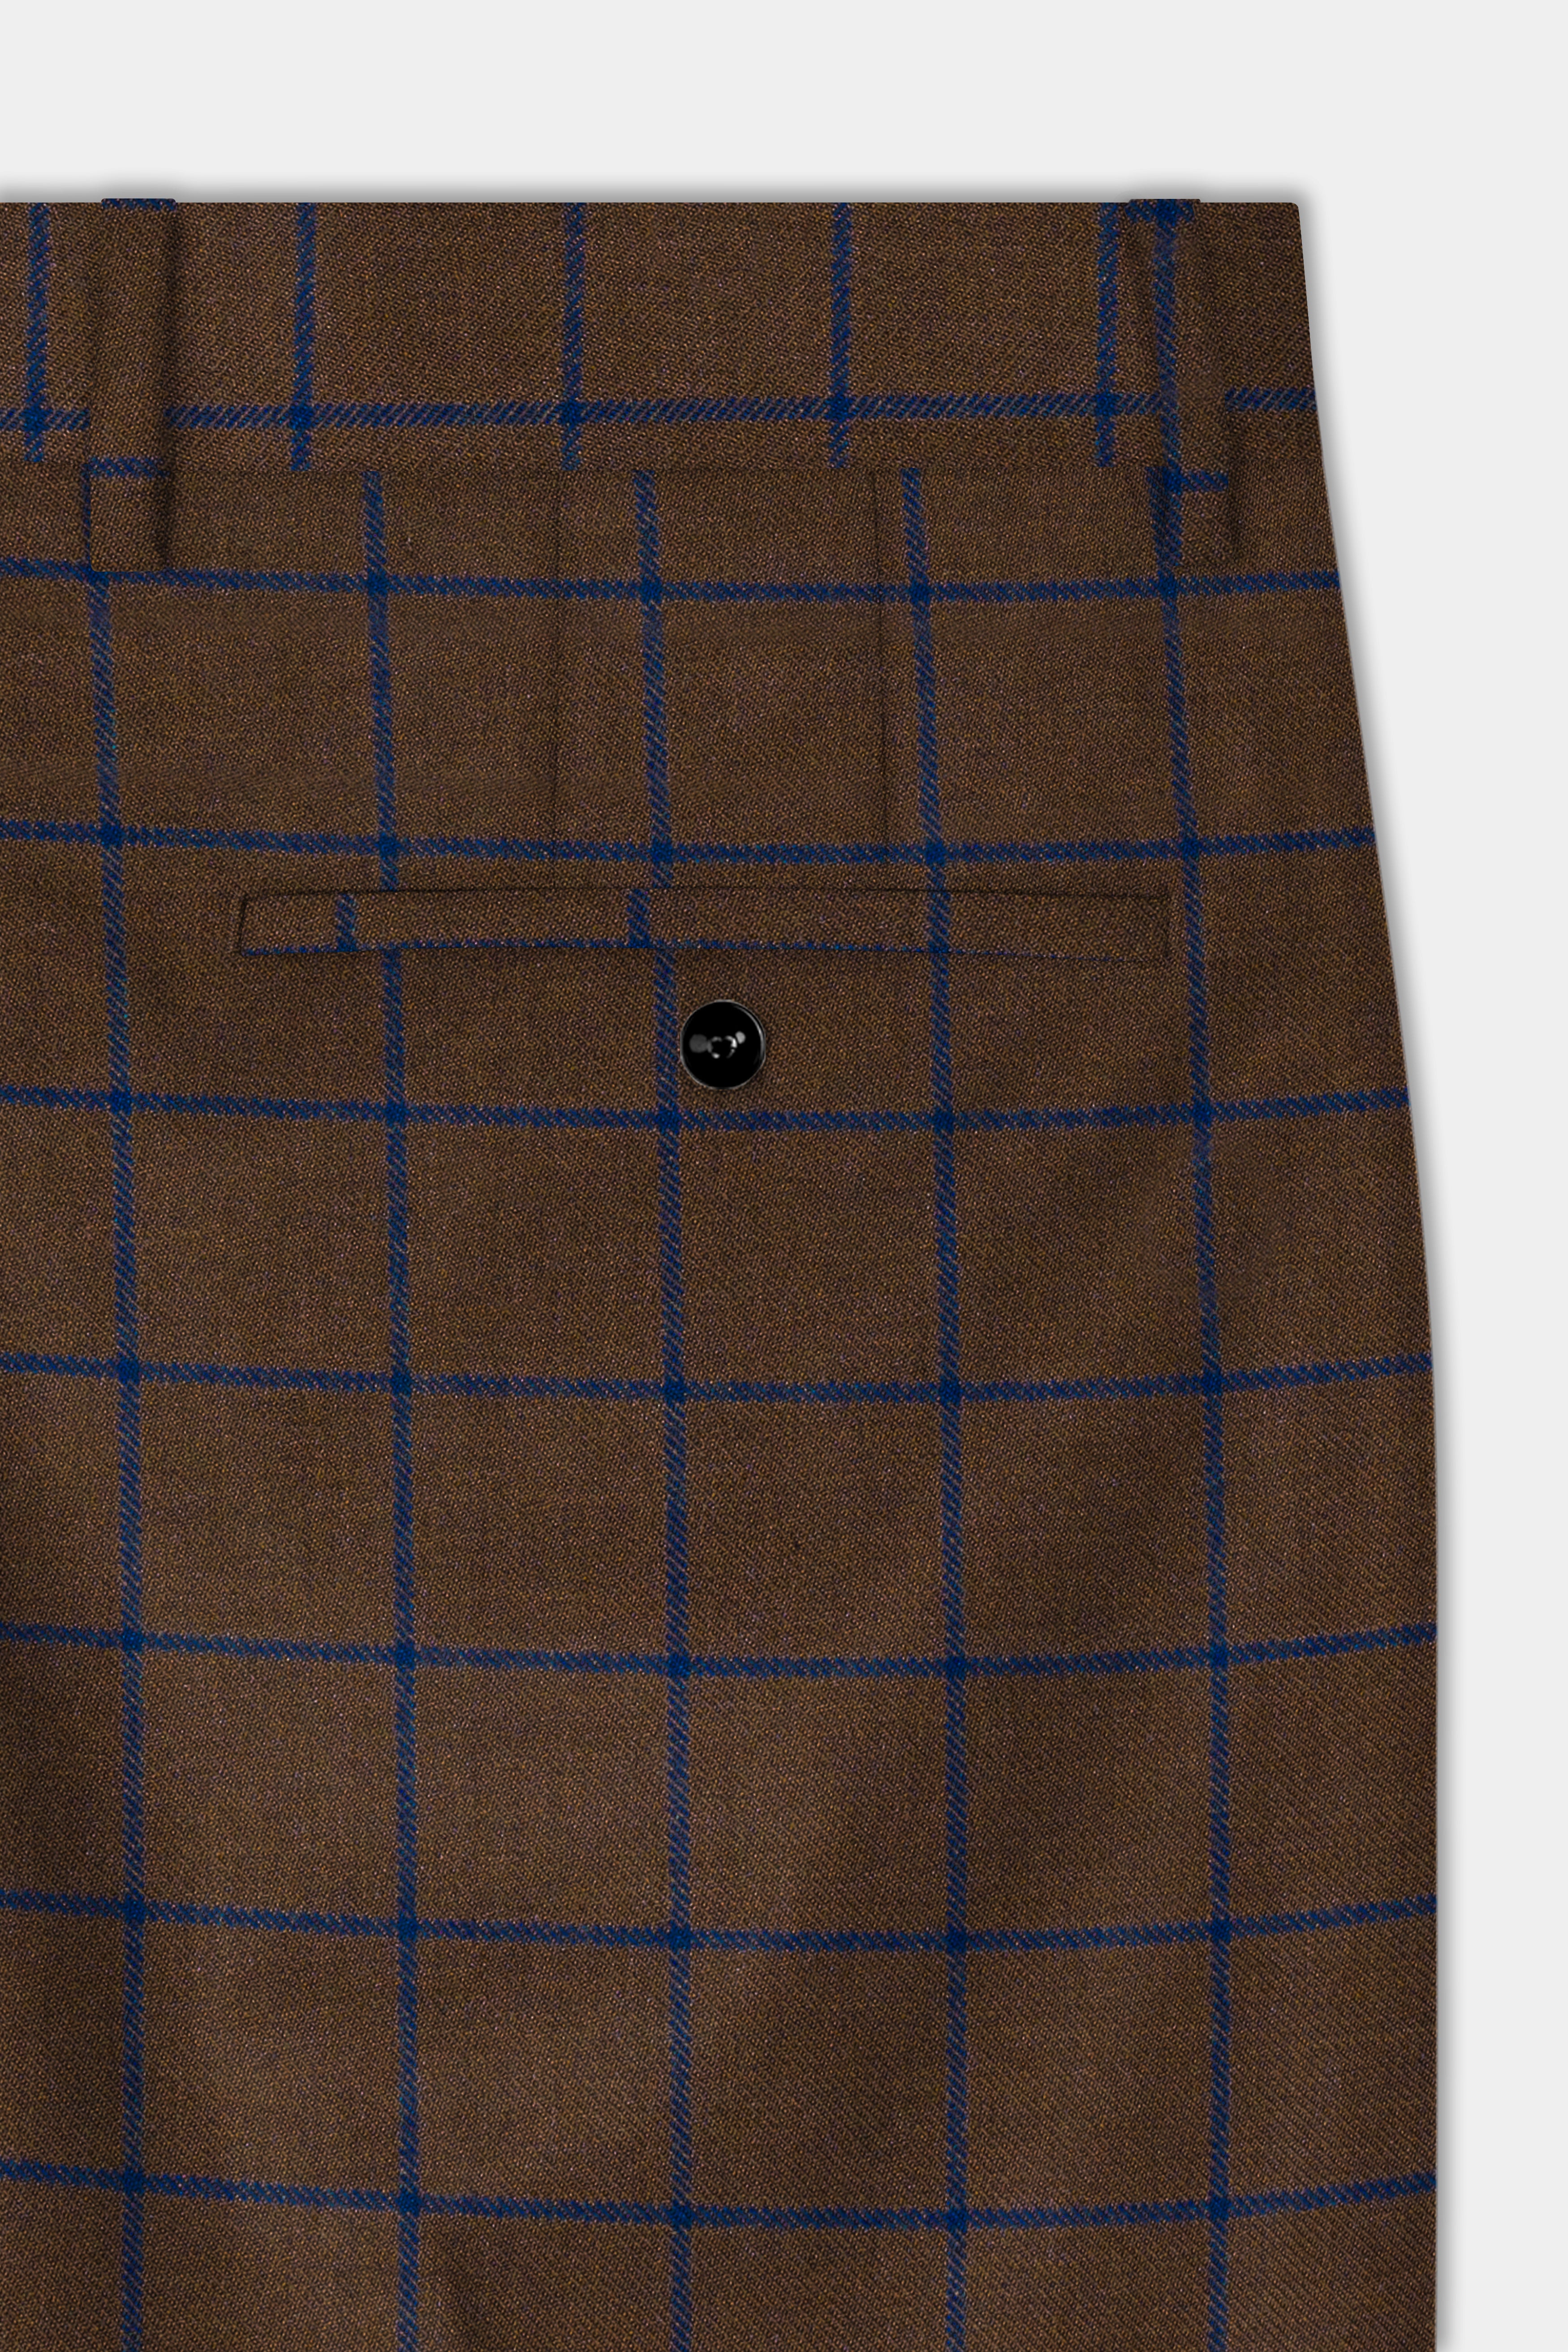 Bistre Brown with Catalina Blue Windowpane Pant